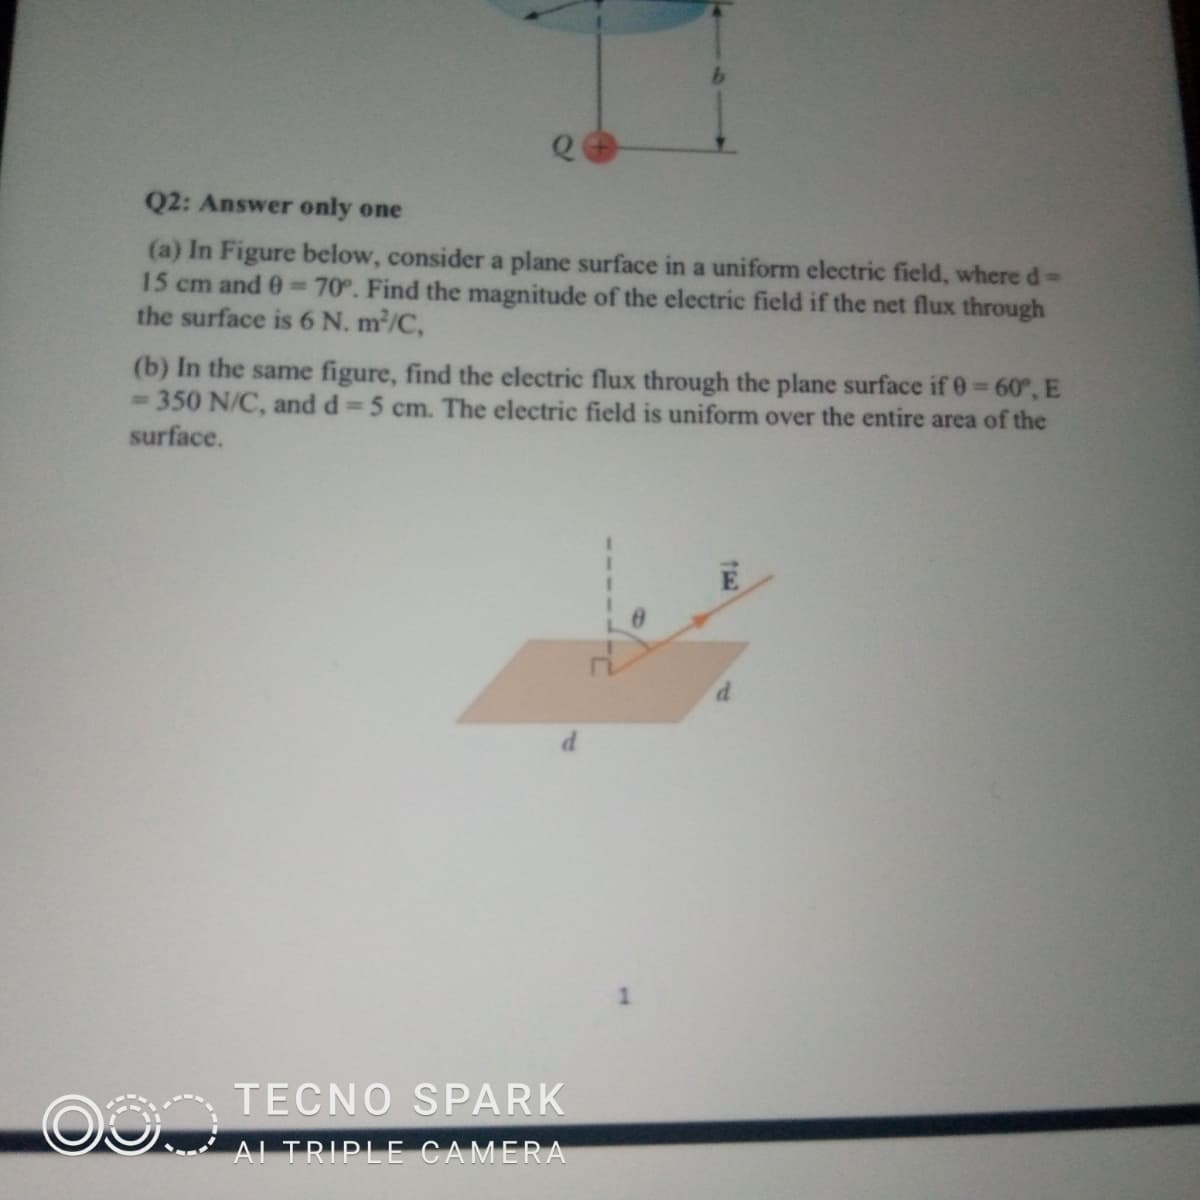 Q2: Answer only one
(a) In Figure below, consider a plane surface in a uniform electric field, where d%-
15 cm and 0-70°. Find the magnitude of the electric field if the net flux through
the surface is 6 N. m/C,
(b) In the same figure, find the electric flux through the plane surface if 0 60°, E
350 N/C, and d 5 cm. The electric field is uniform over the entire area of the
surface.
%3D
1
OO TECNO SPARK
AI TRIPLE CAMERA
